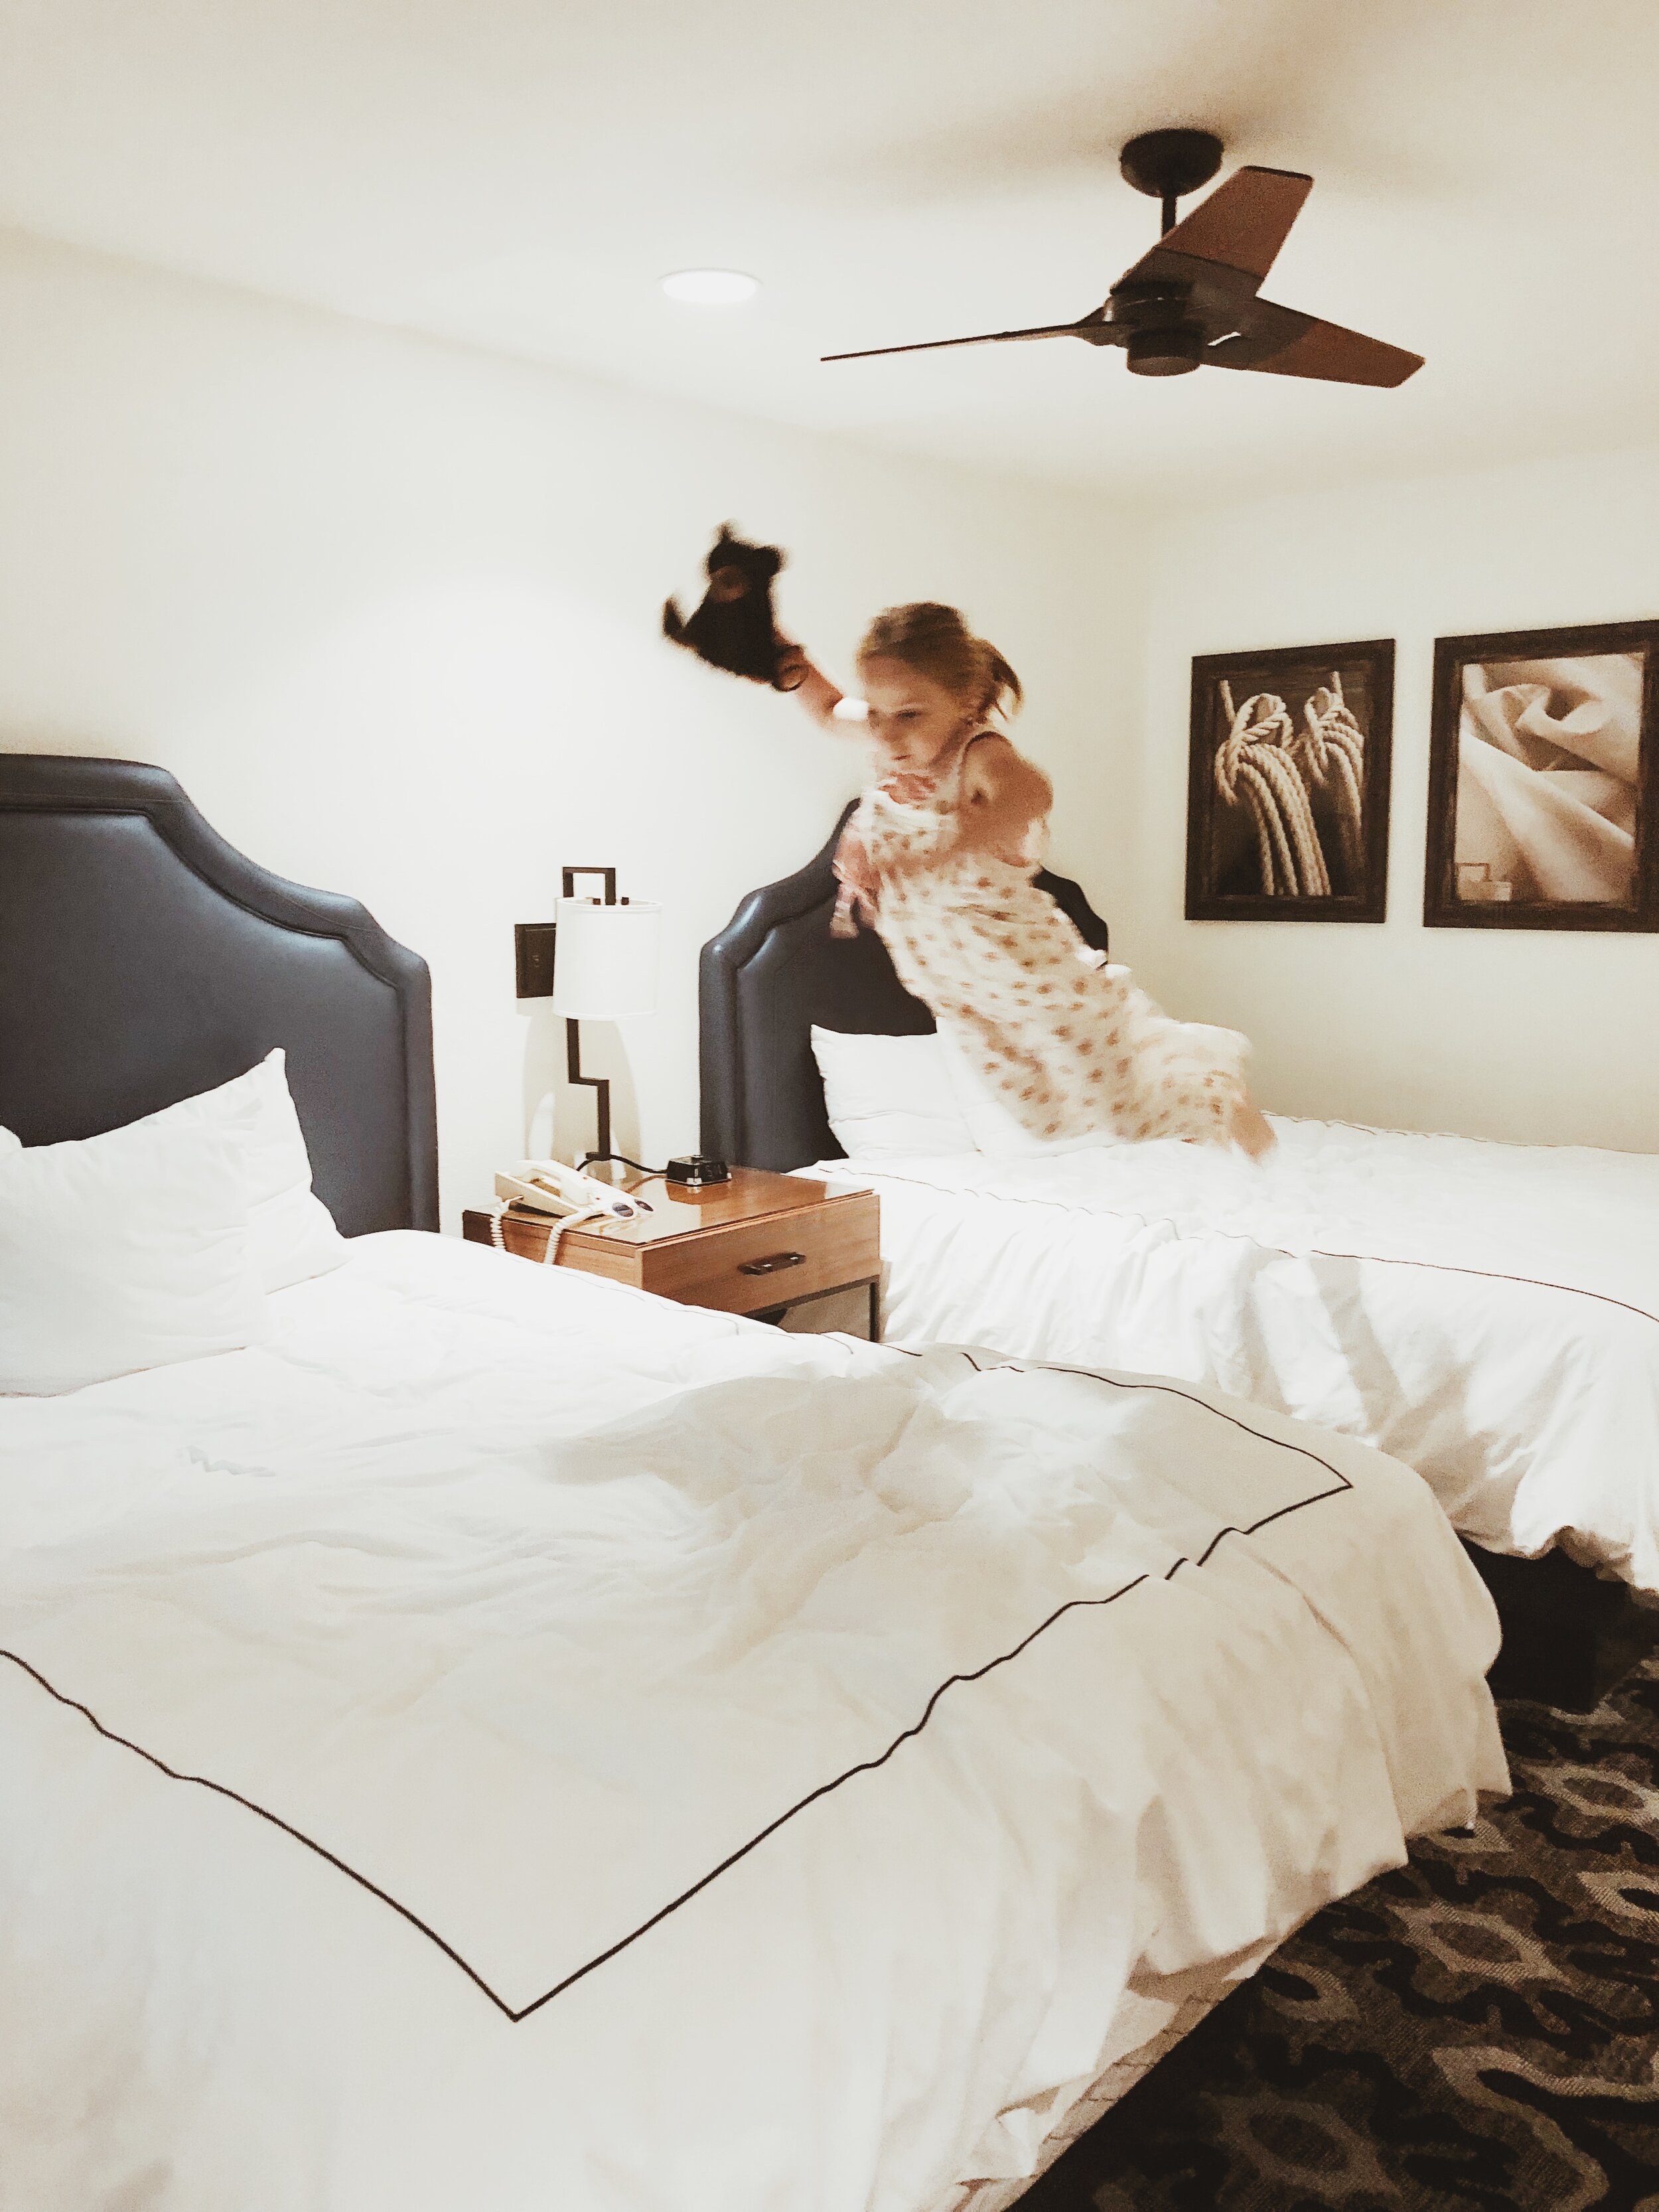 Bed jumping in Monterey, California